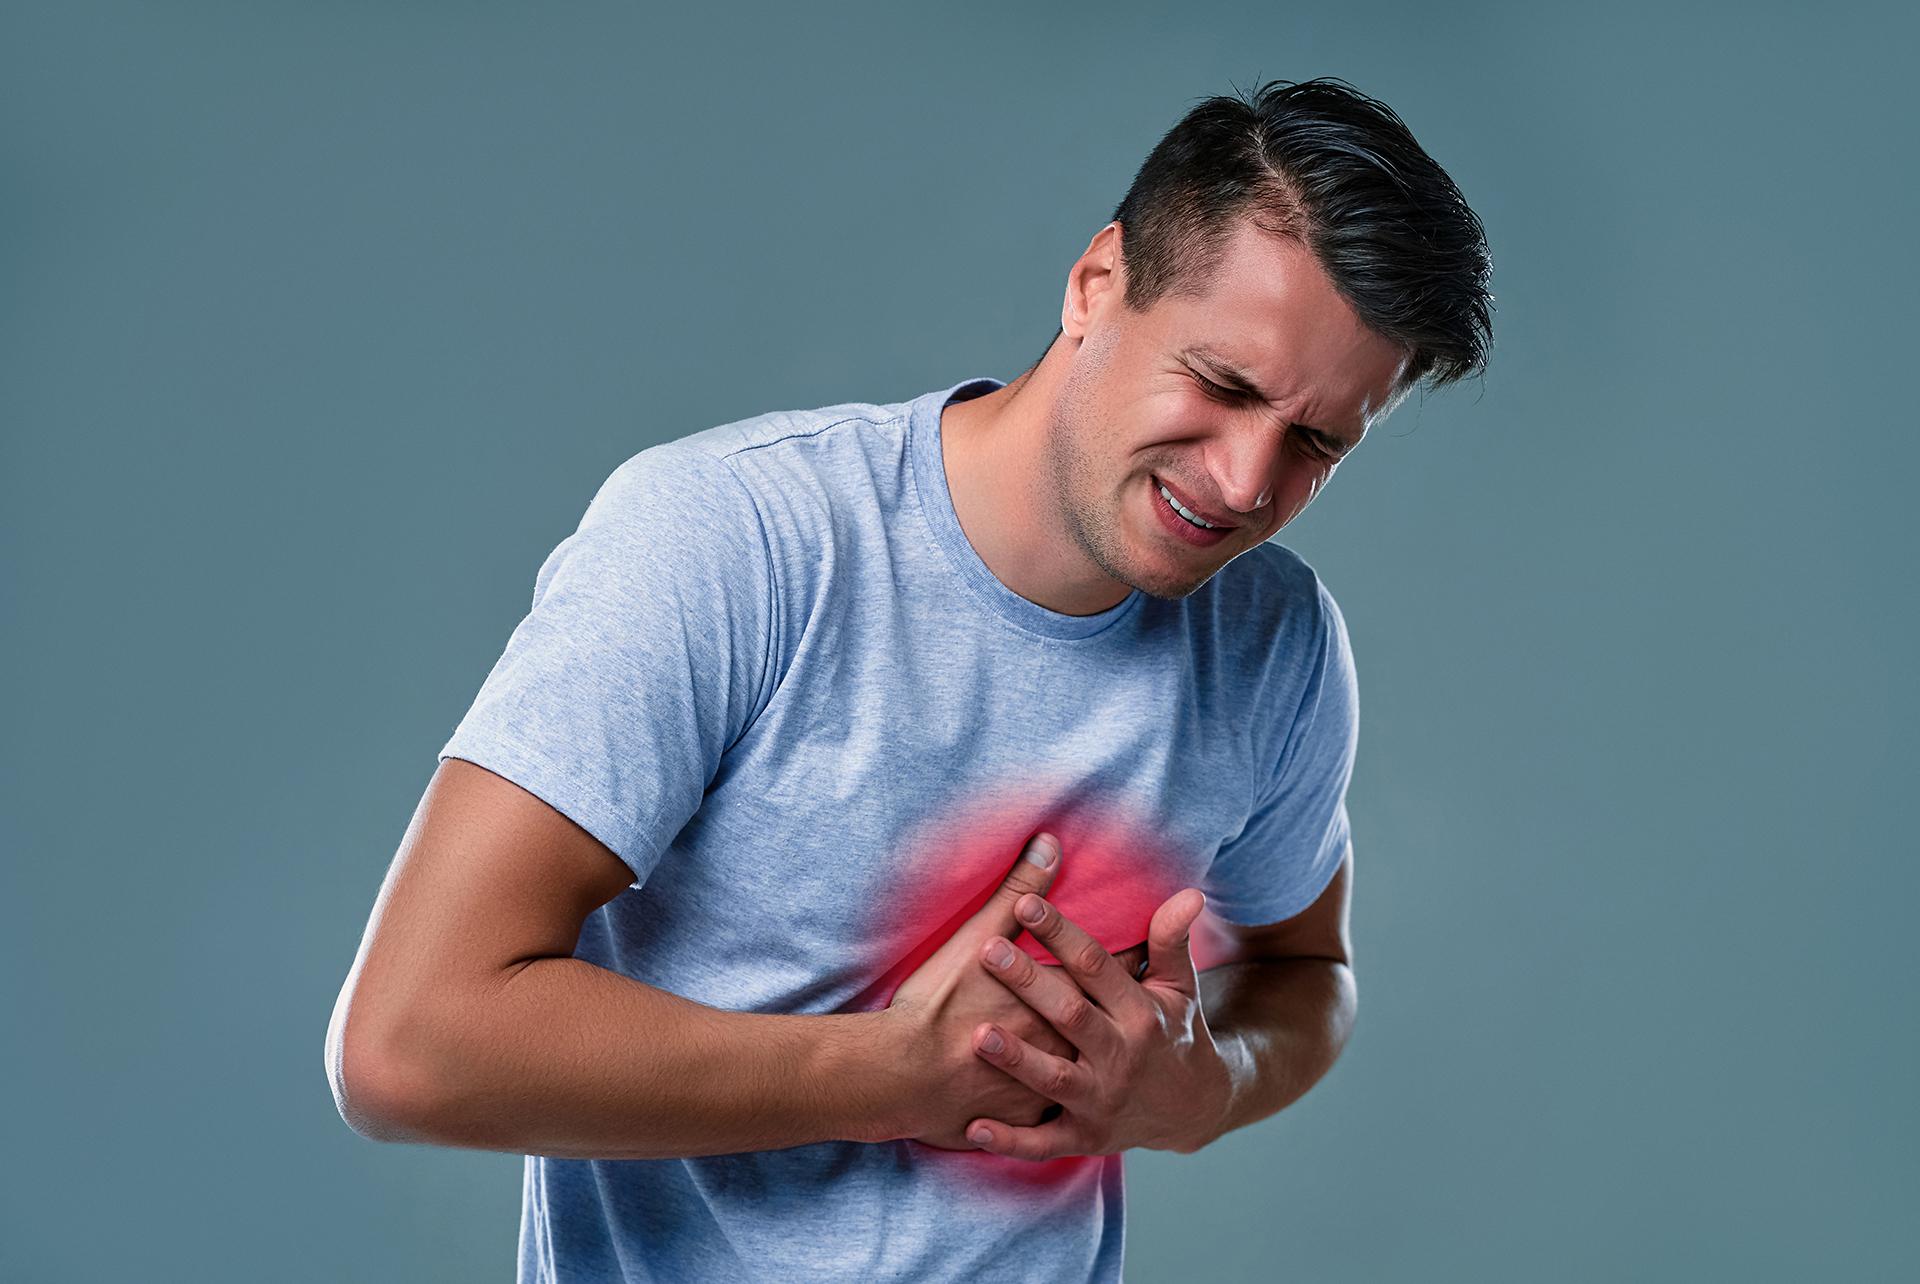 Heart Attack Symptoms: How to Know if you are Having a Heart Attack